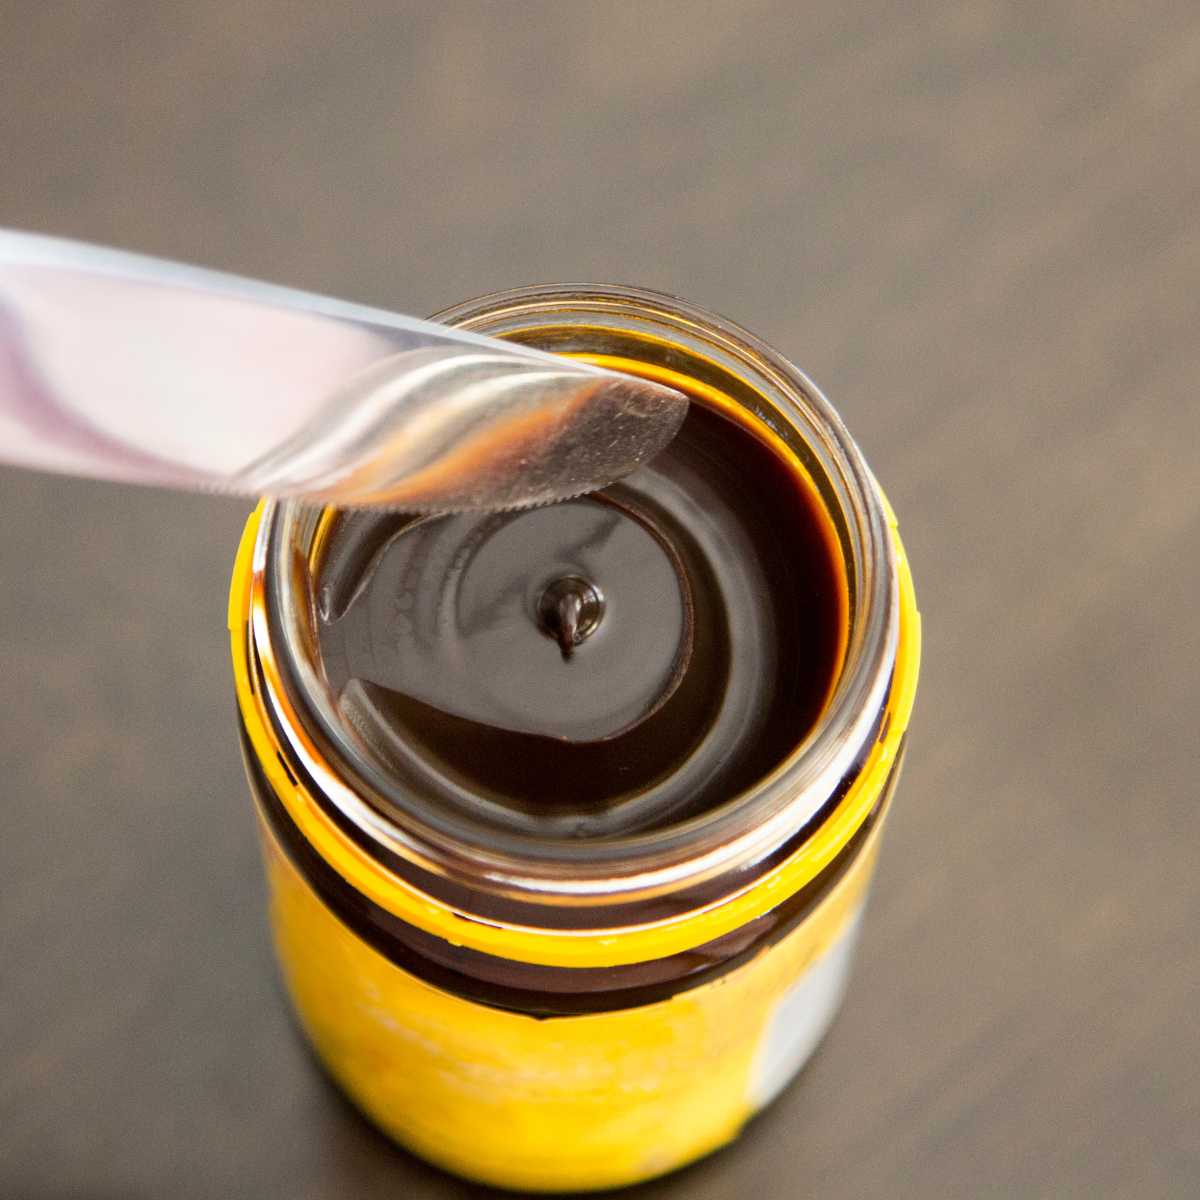 Yeast extract in a jar with a knife about to dip into it.